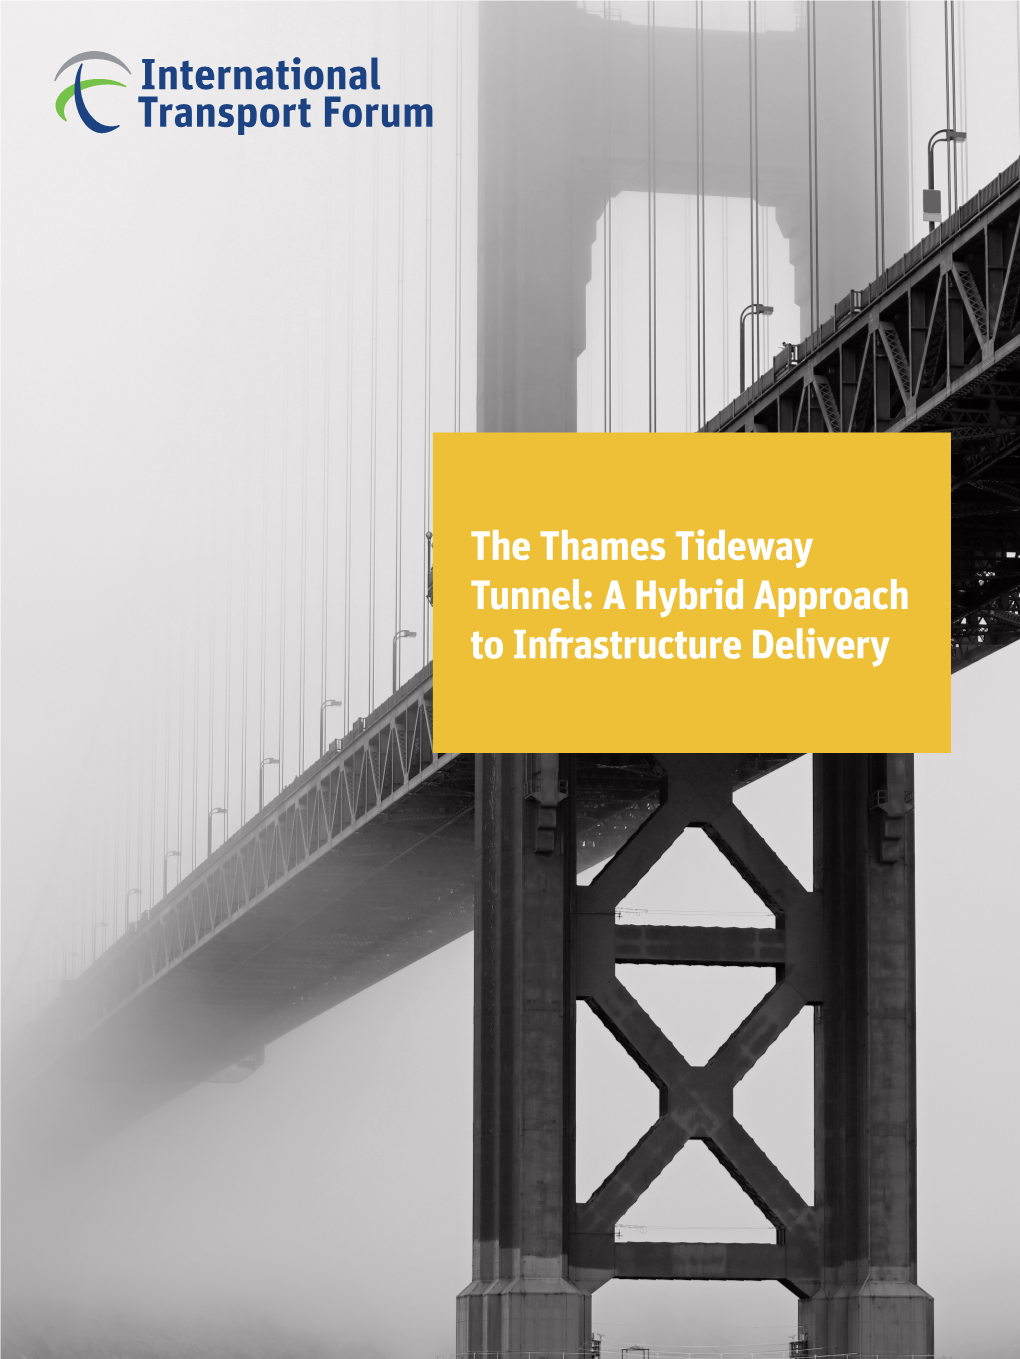 The Thames Tideway Tunnel: a Hybrid Approach to Infrastructure Delivery